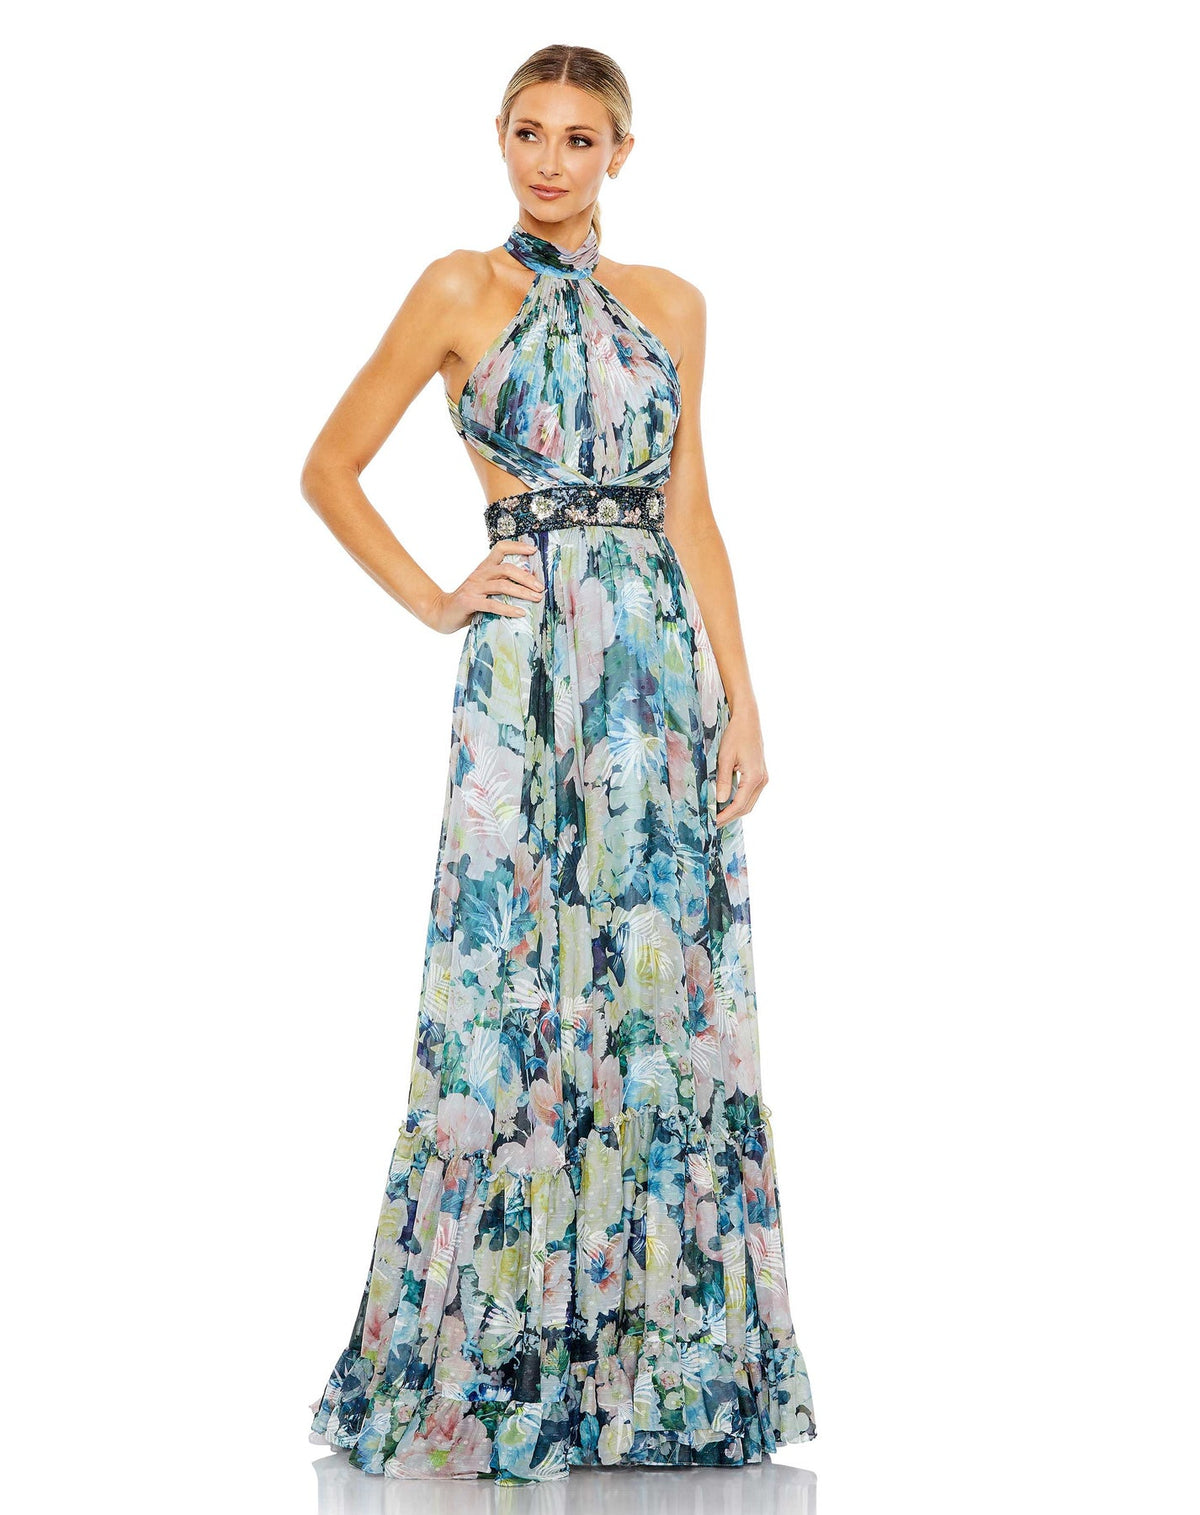 Mac Duggal, FLORAL HALTER A LINE GOWN W/ CUTOUTS AND EMBELLISHED BELT, Floral Print Halter Cut Out Maxi Dress - Blue, Style #68089